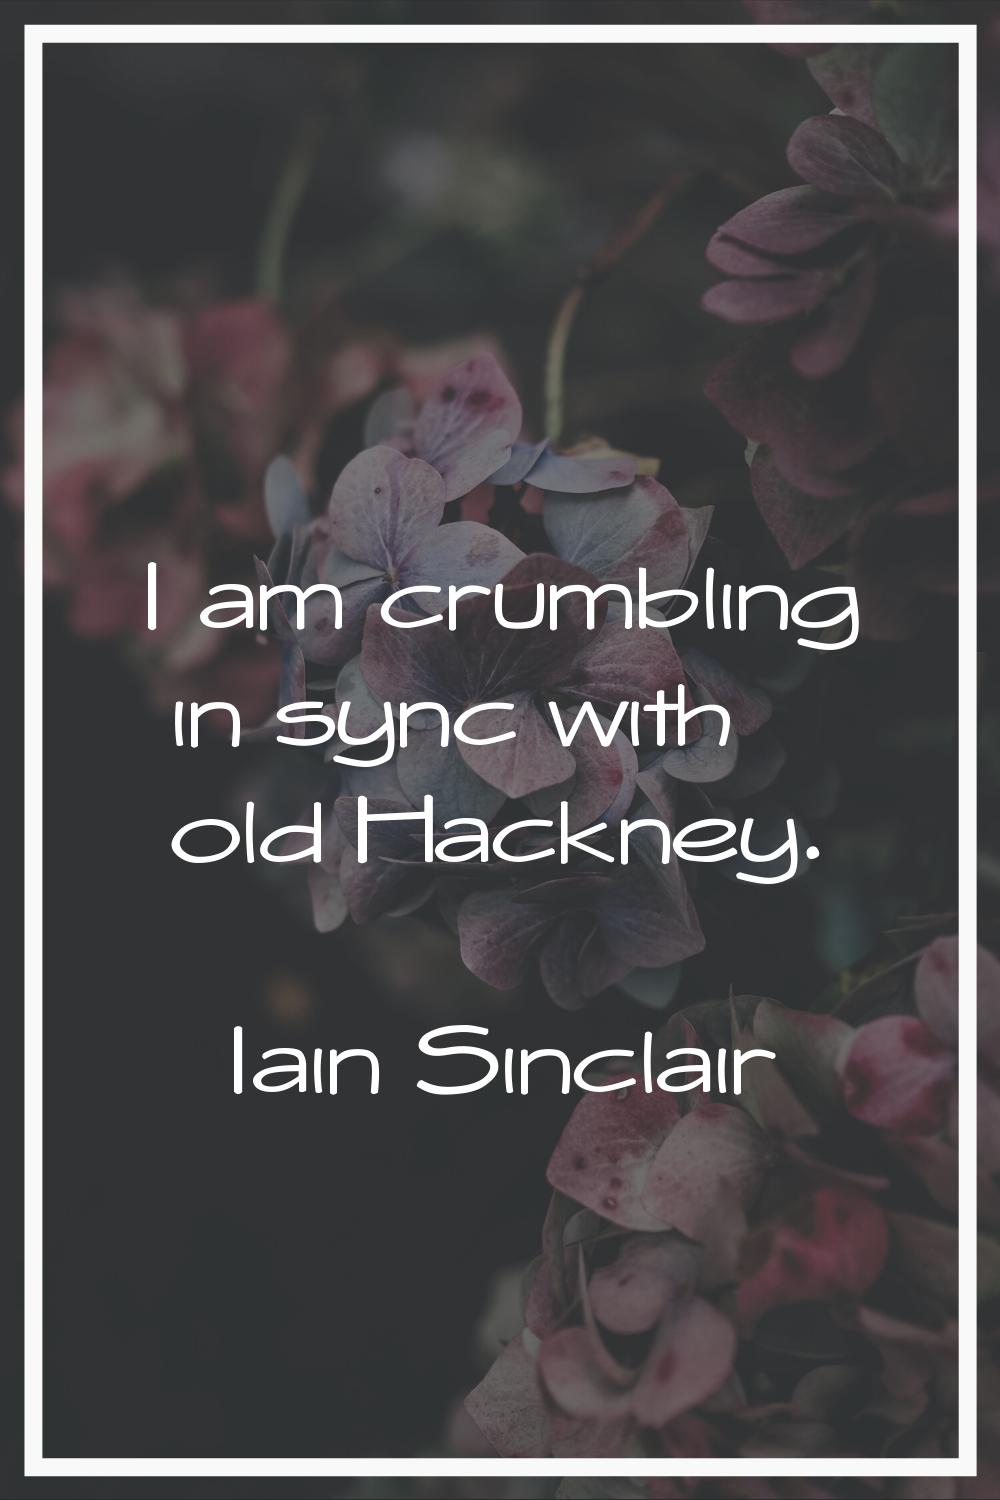 I am crumbling in sync with old Hackney.